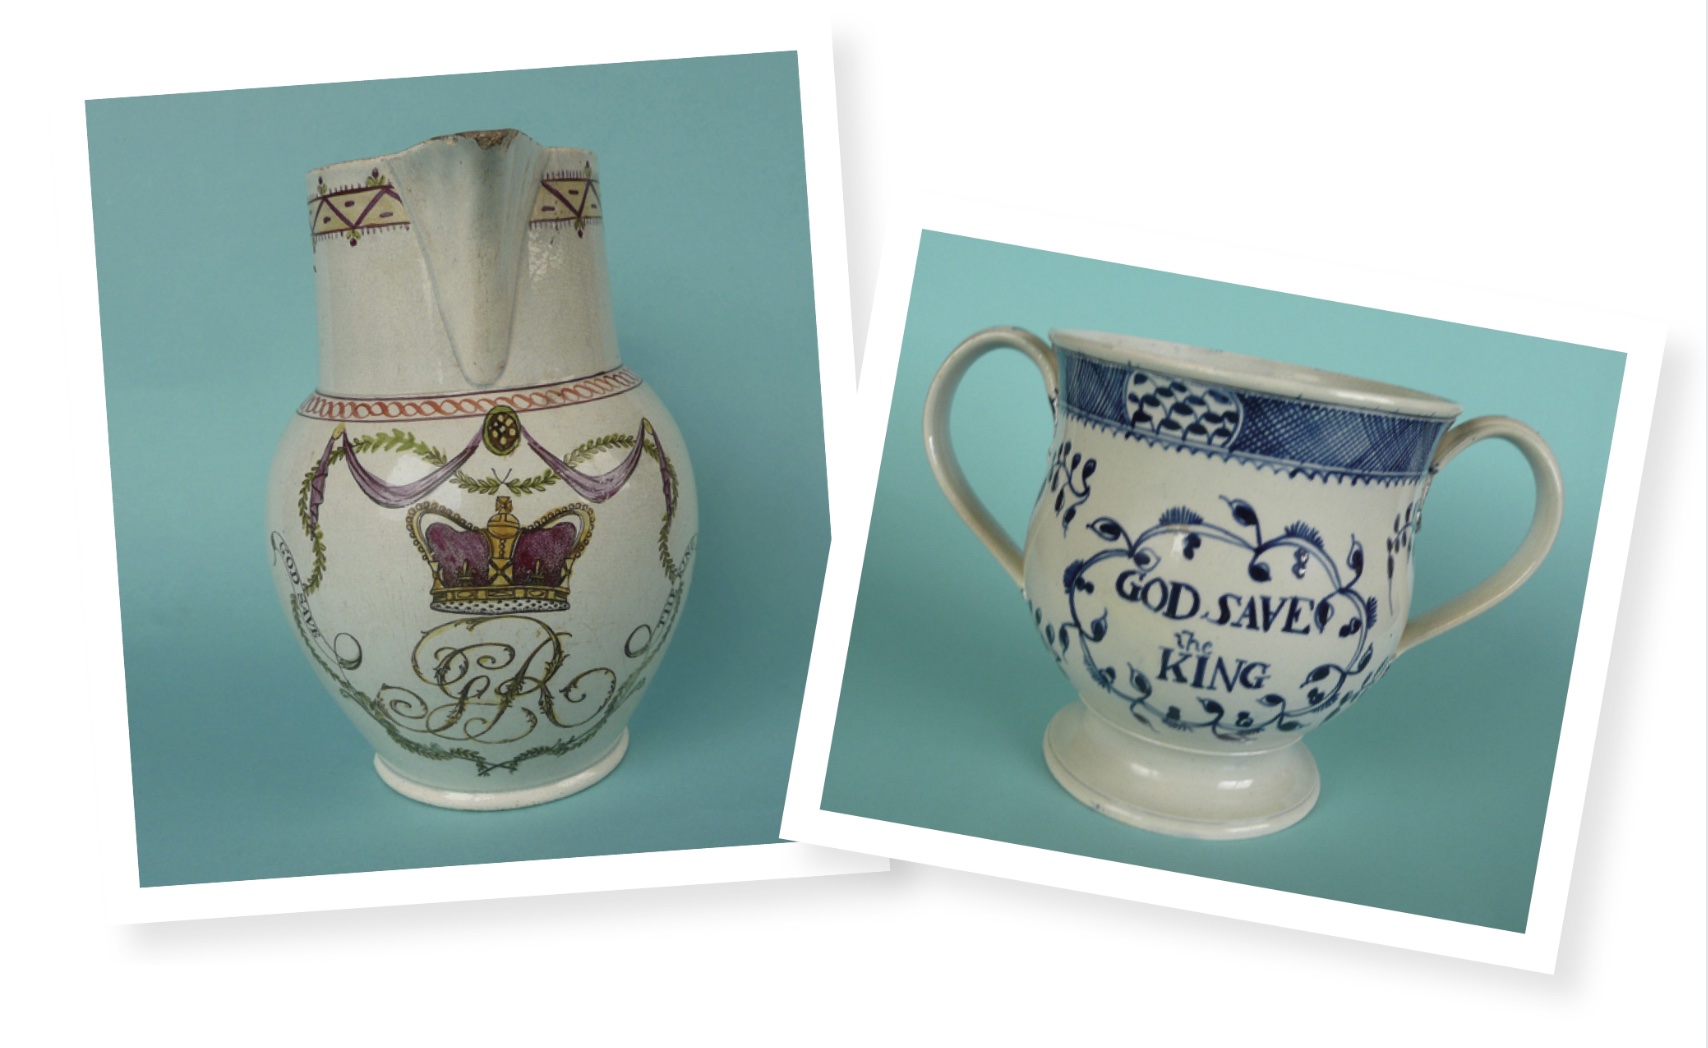 A pearlware jug sold for £220 in 2017 at the Berkshire auctioneers Historical and Collectable, and a pearlware loving cup, c. 1789